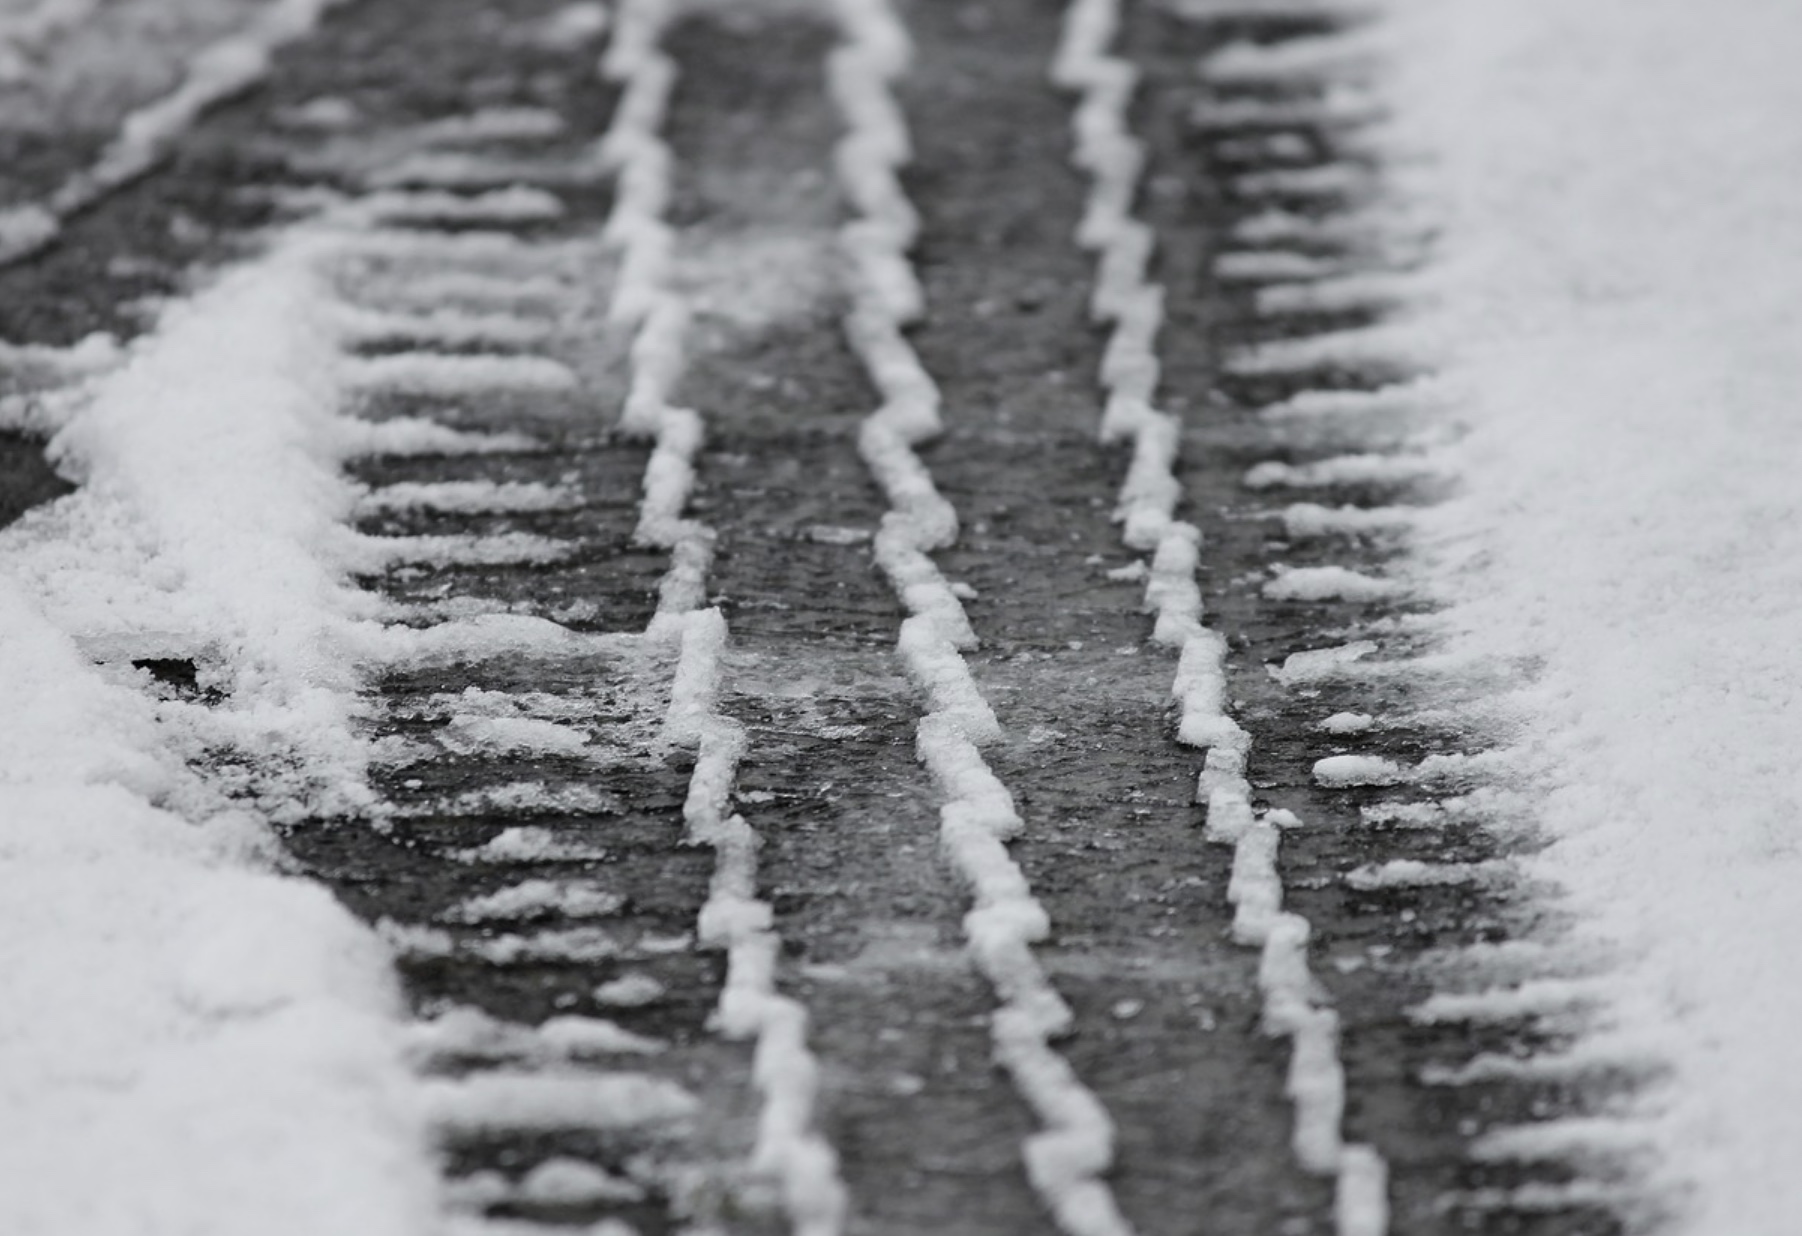 Snow tire marks, for tires in Murfreesboro, TN call today, we offer brakes, oil-change, tune-up, tires and many more auto services – Murfreesboro Auto Repair.